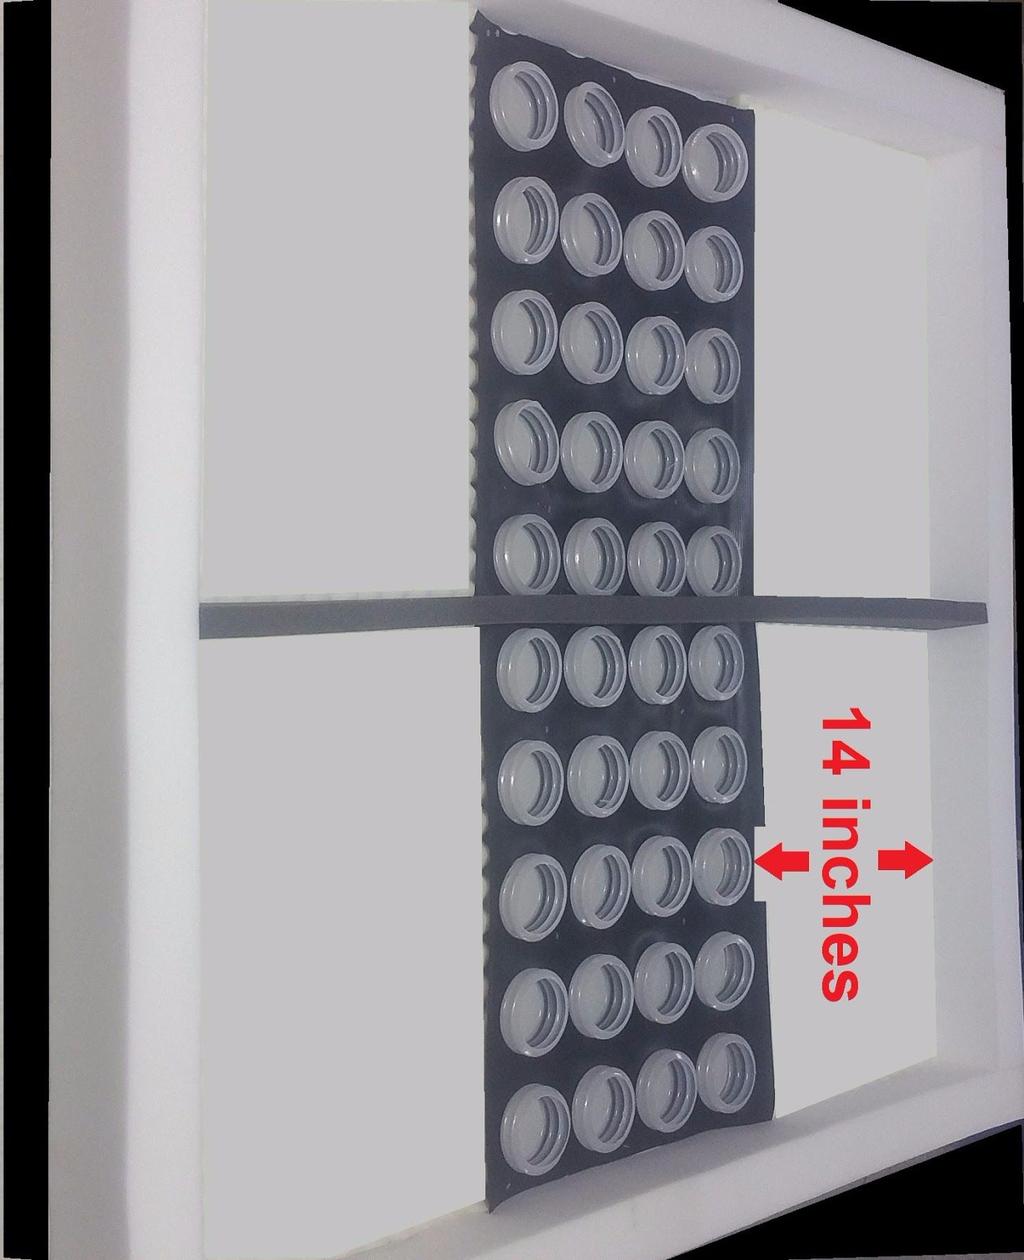 5 inch wide gray foam center divider, it might be separate or adhered to the tray. The divider that is separate can be placed now or later.